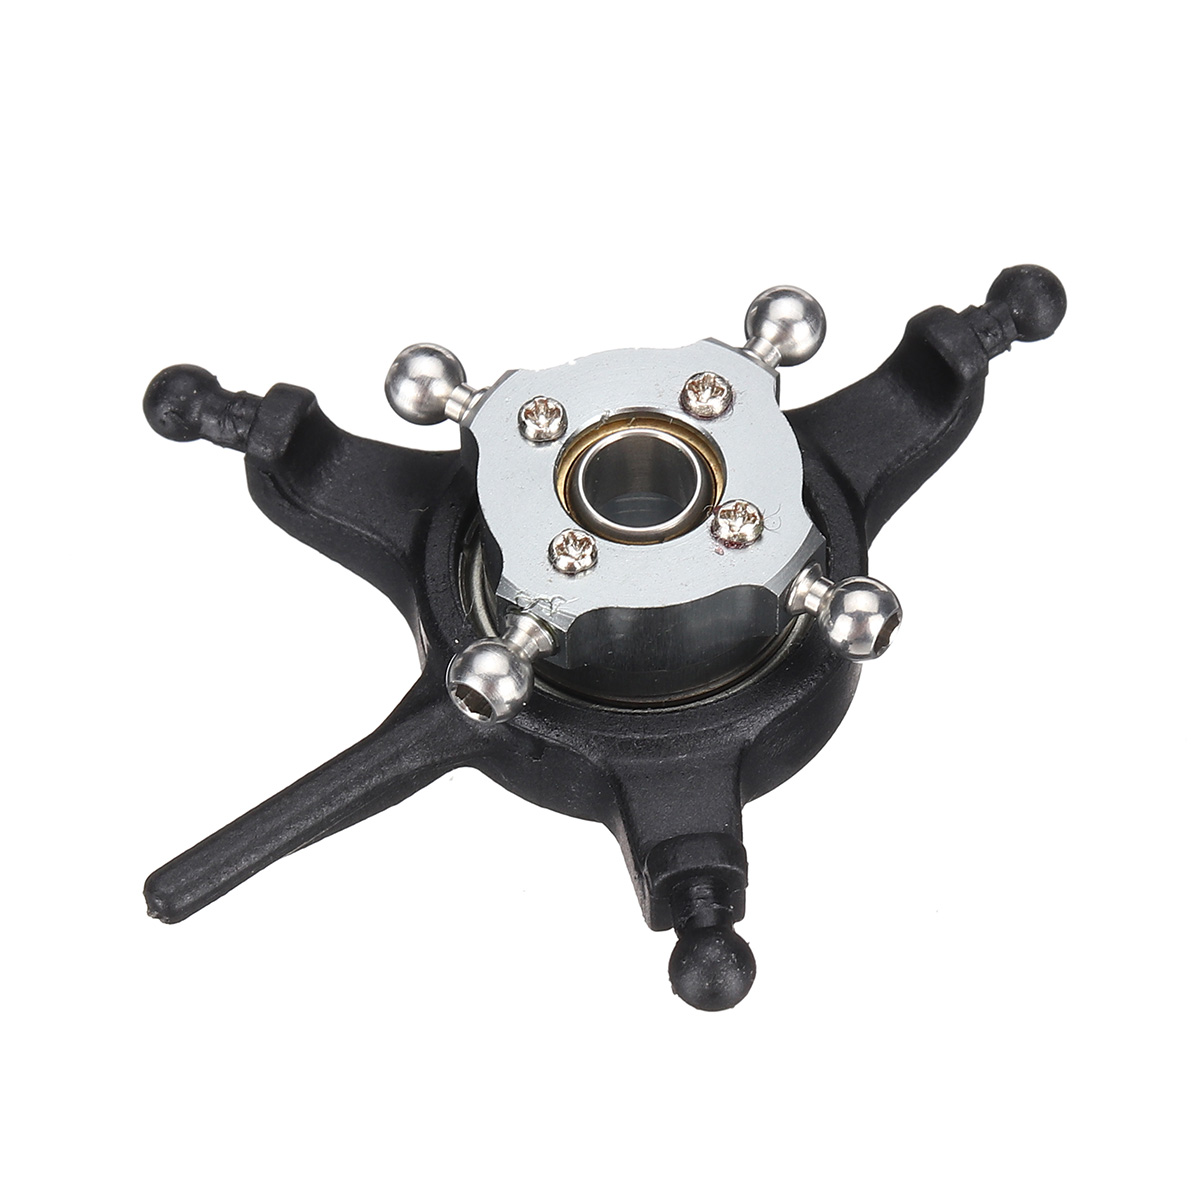 YXZNRC F09-S Eachine E200 Swashplate RC Helicopter Parts